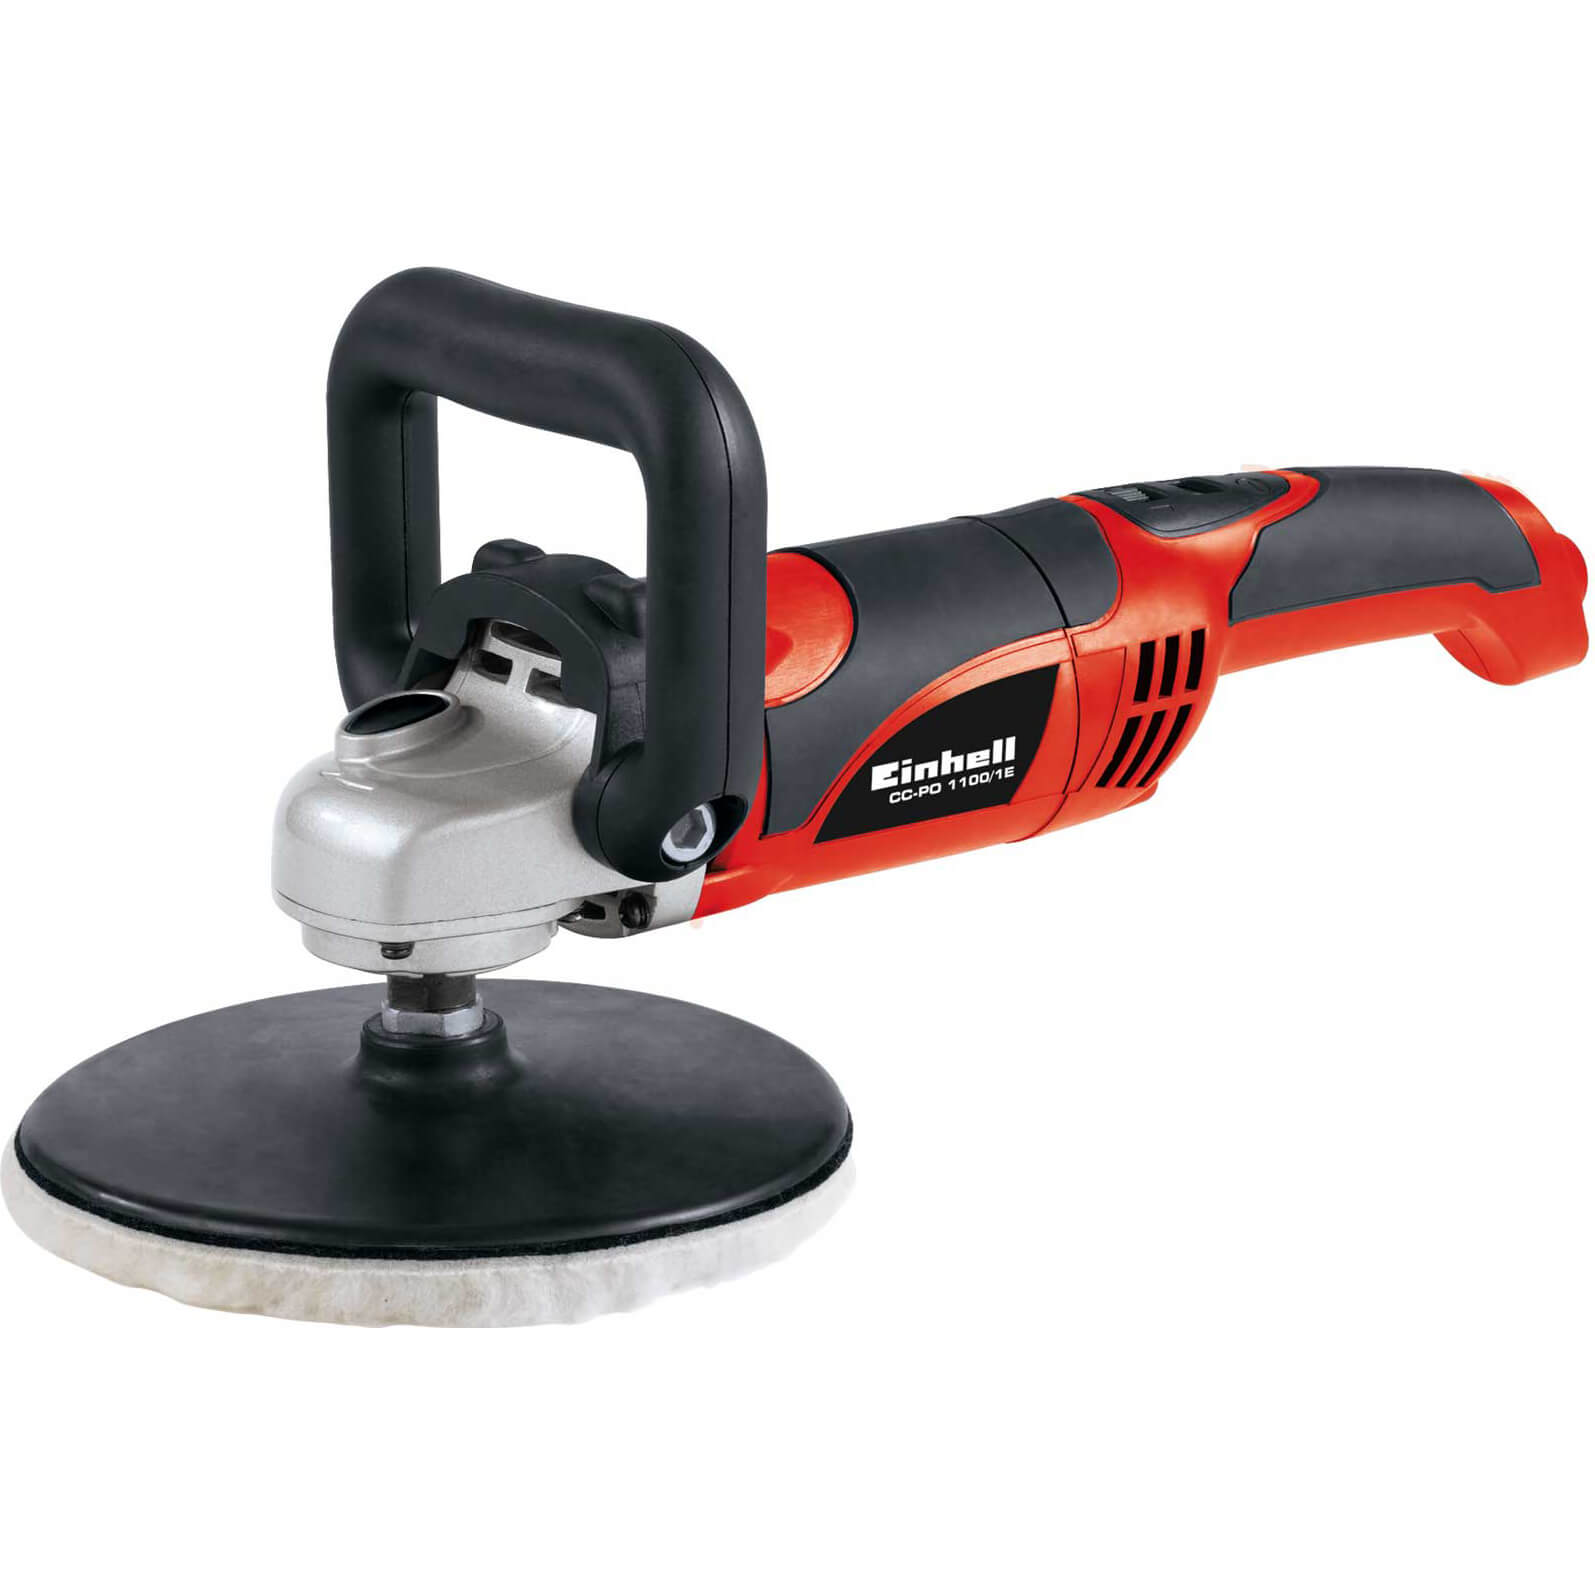 Image of Einhell CC-PO 1100/1 E Disc Polisher and Sander 180mm